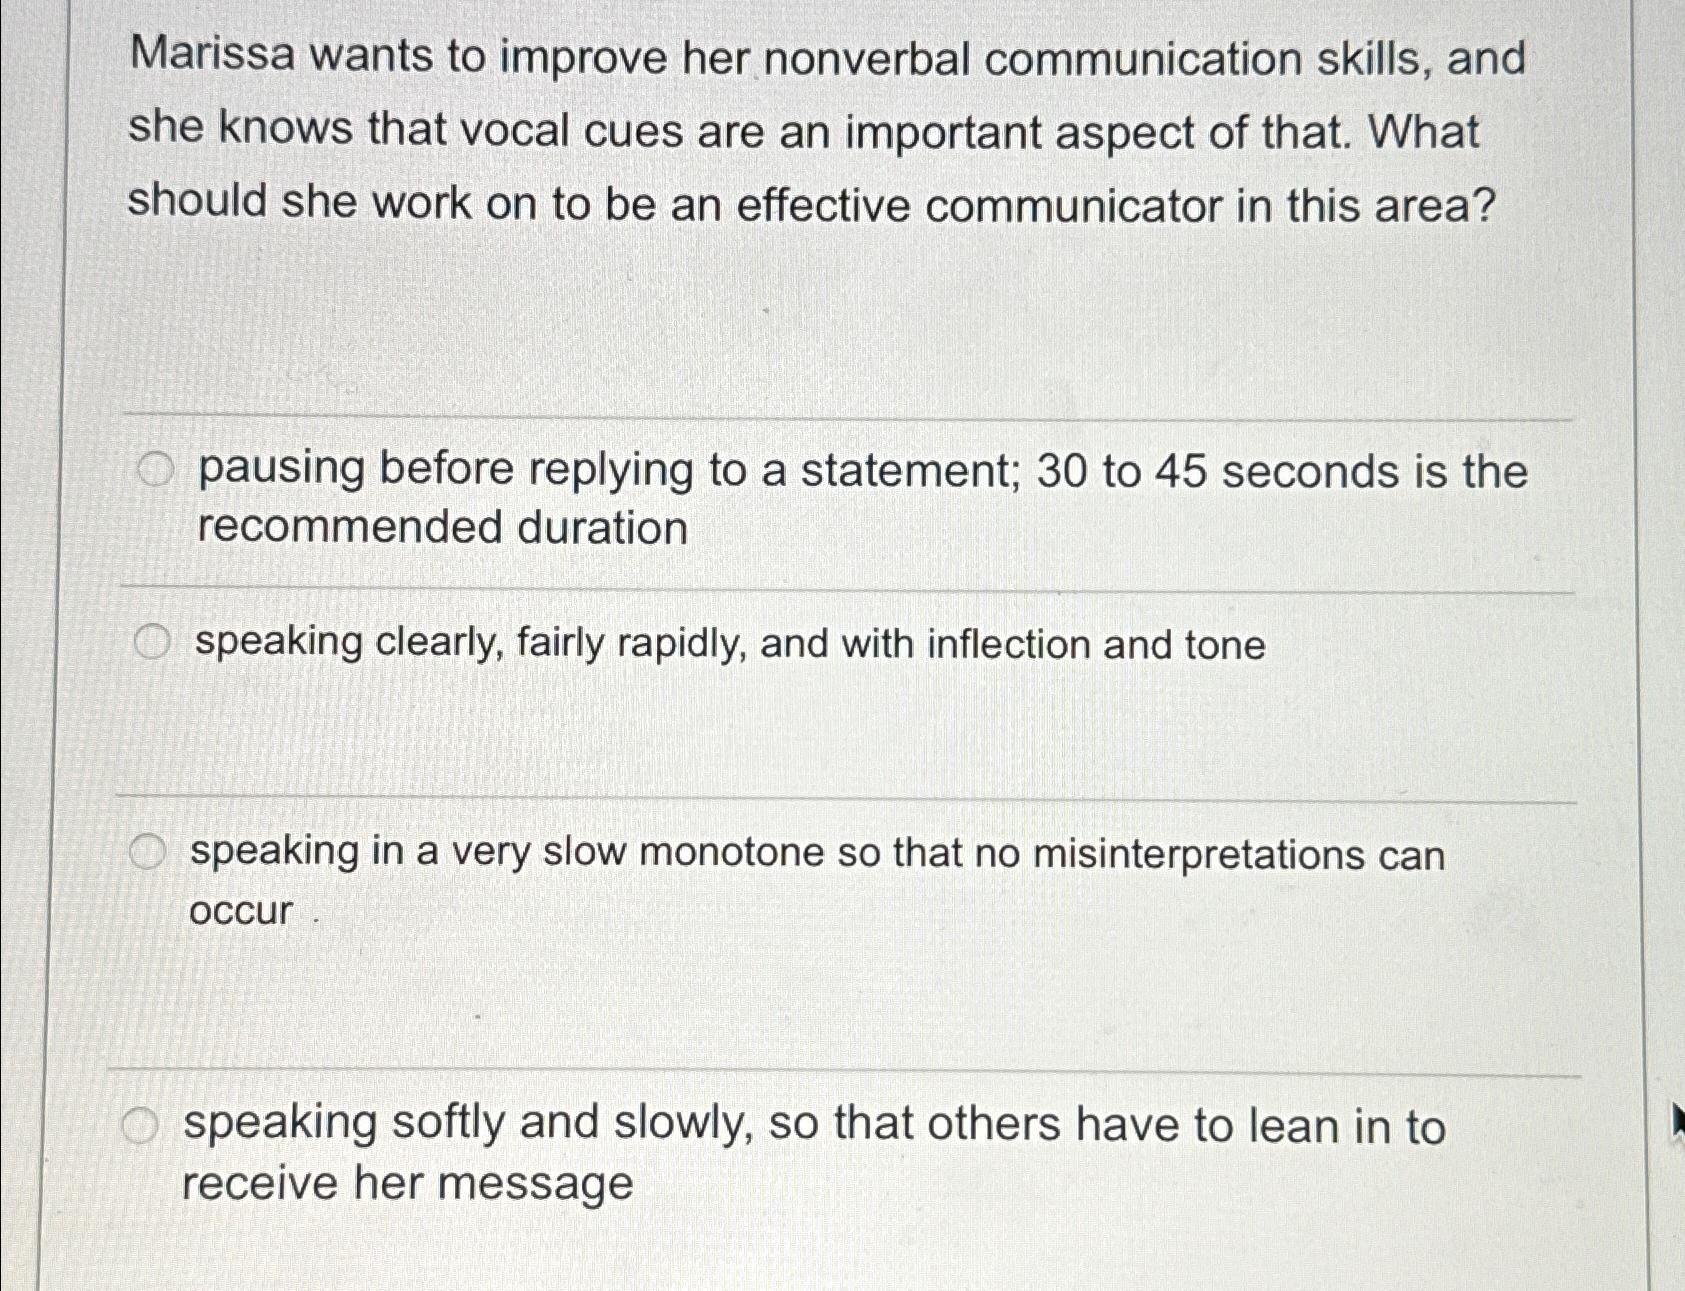 Marissa wants to improve her nonverbal communication skills, and she knows that vocal cues are an important